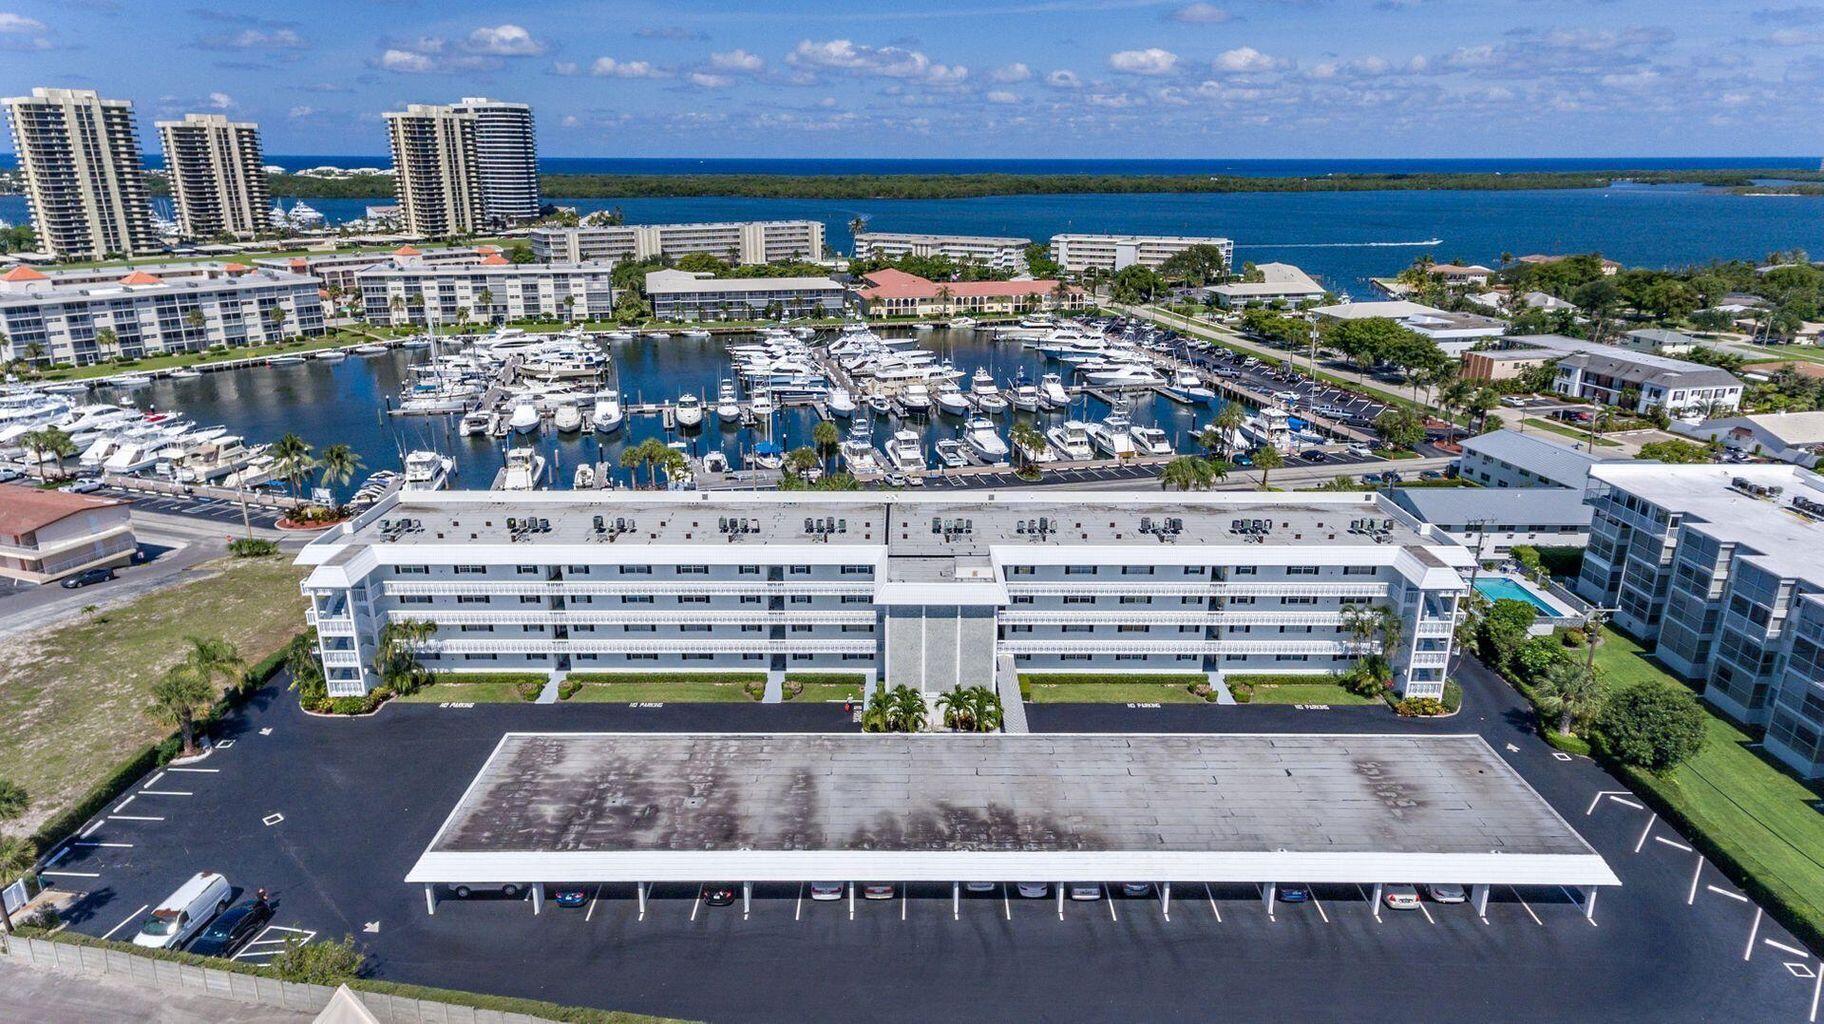 Property for Sale at 907 Marina Drive 208, North Palm Beach, Miami-Dade County, Florida - Bedrooms: 2 
Bathrooms: 2  - $224,500